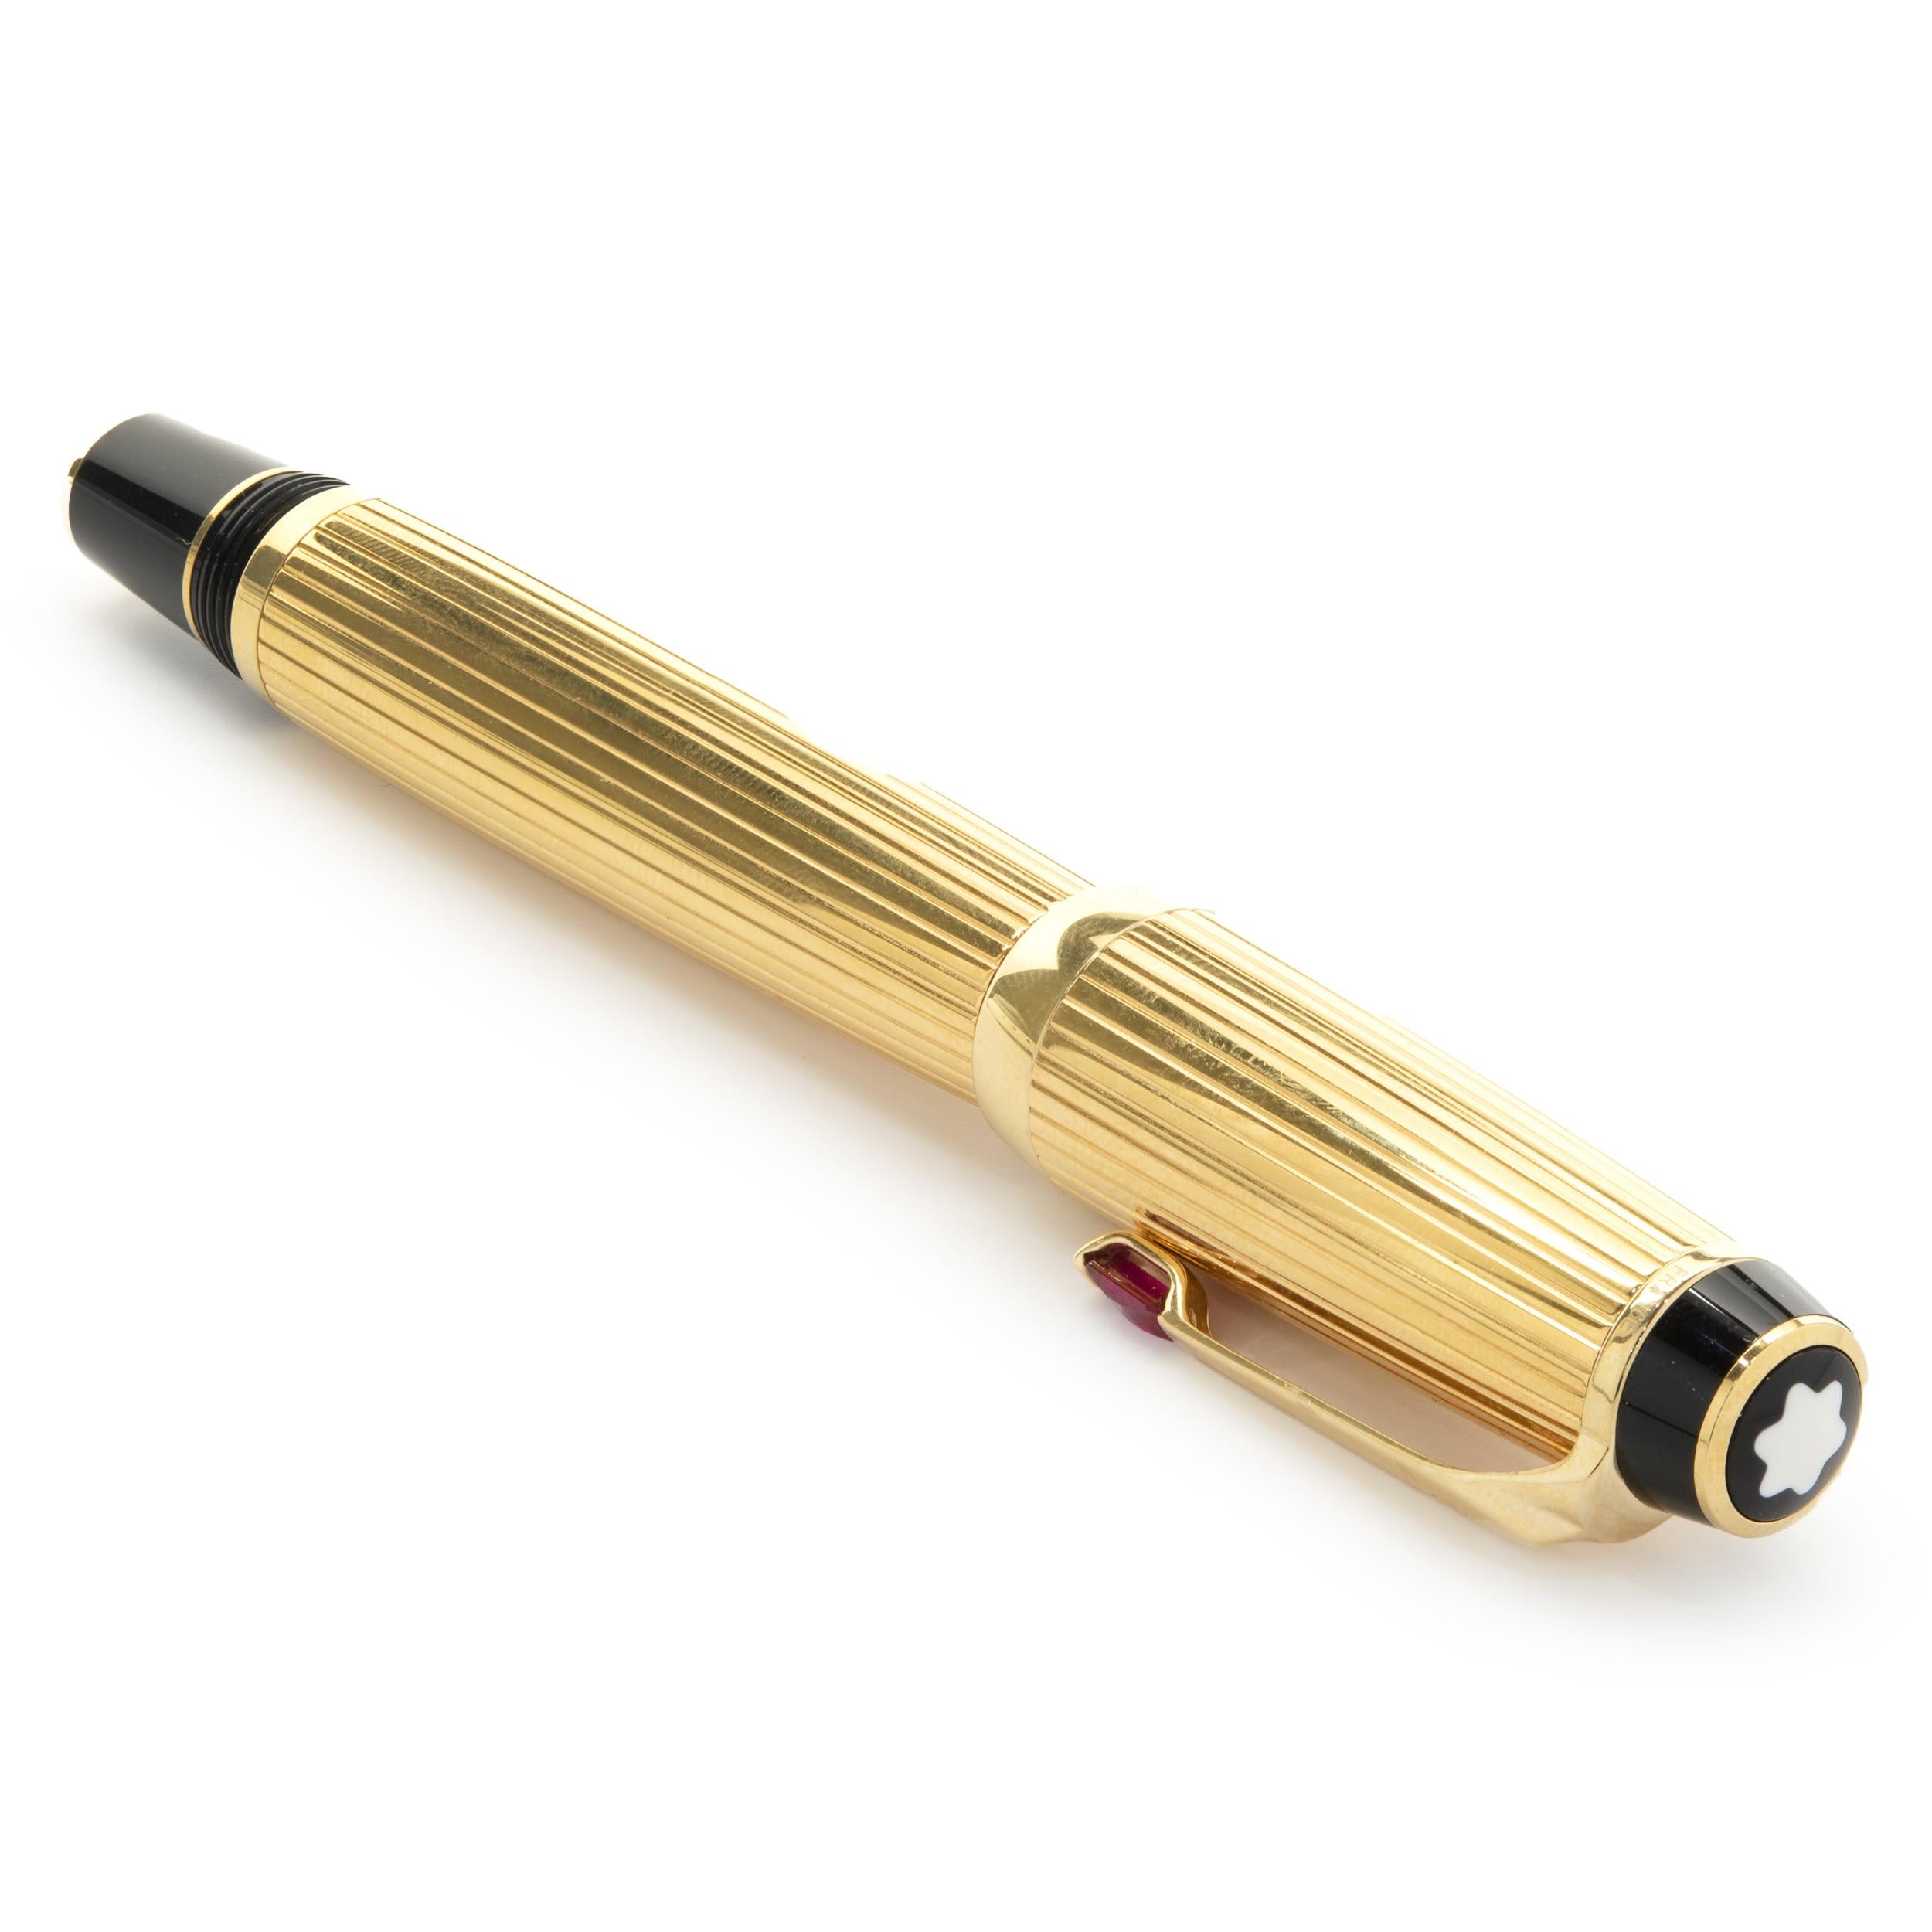 This pen is made by Mont Blanc for the Boheme collection. The ballpoint pen is encased in gold plated brass. It comes with MontBlanc box, no papers.